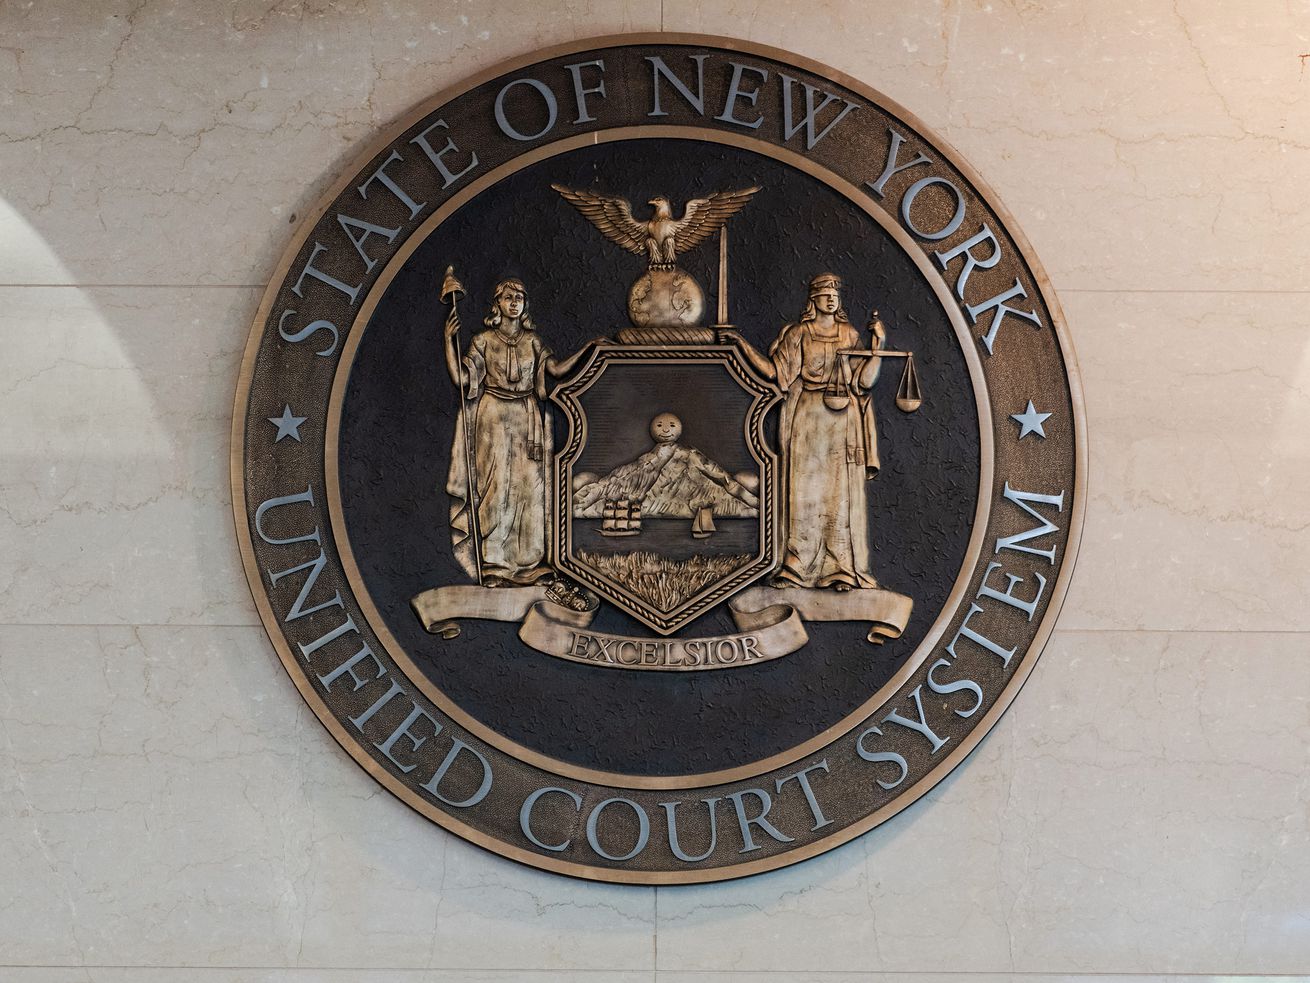 The seal of the State of New York Unified Court System hangs in the lobby of Kings County Supreme Court.